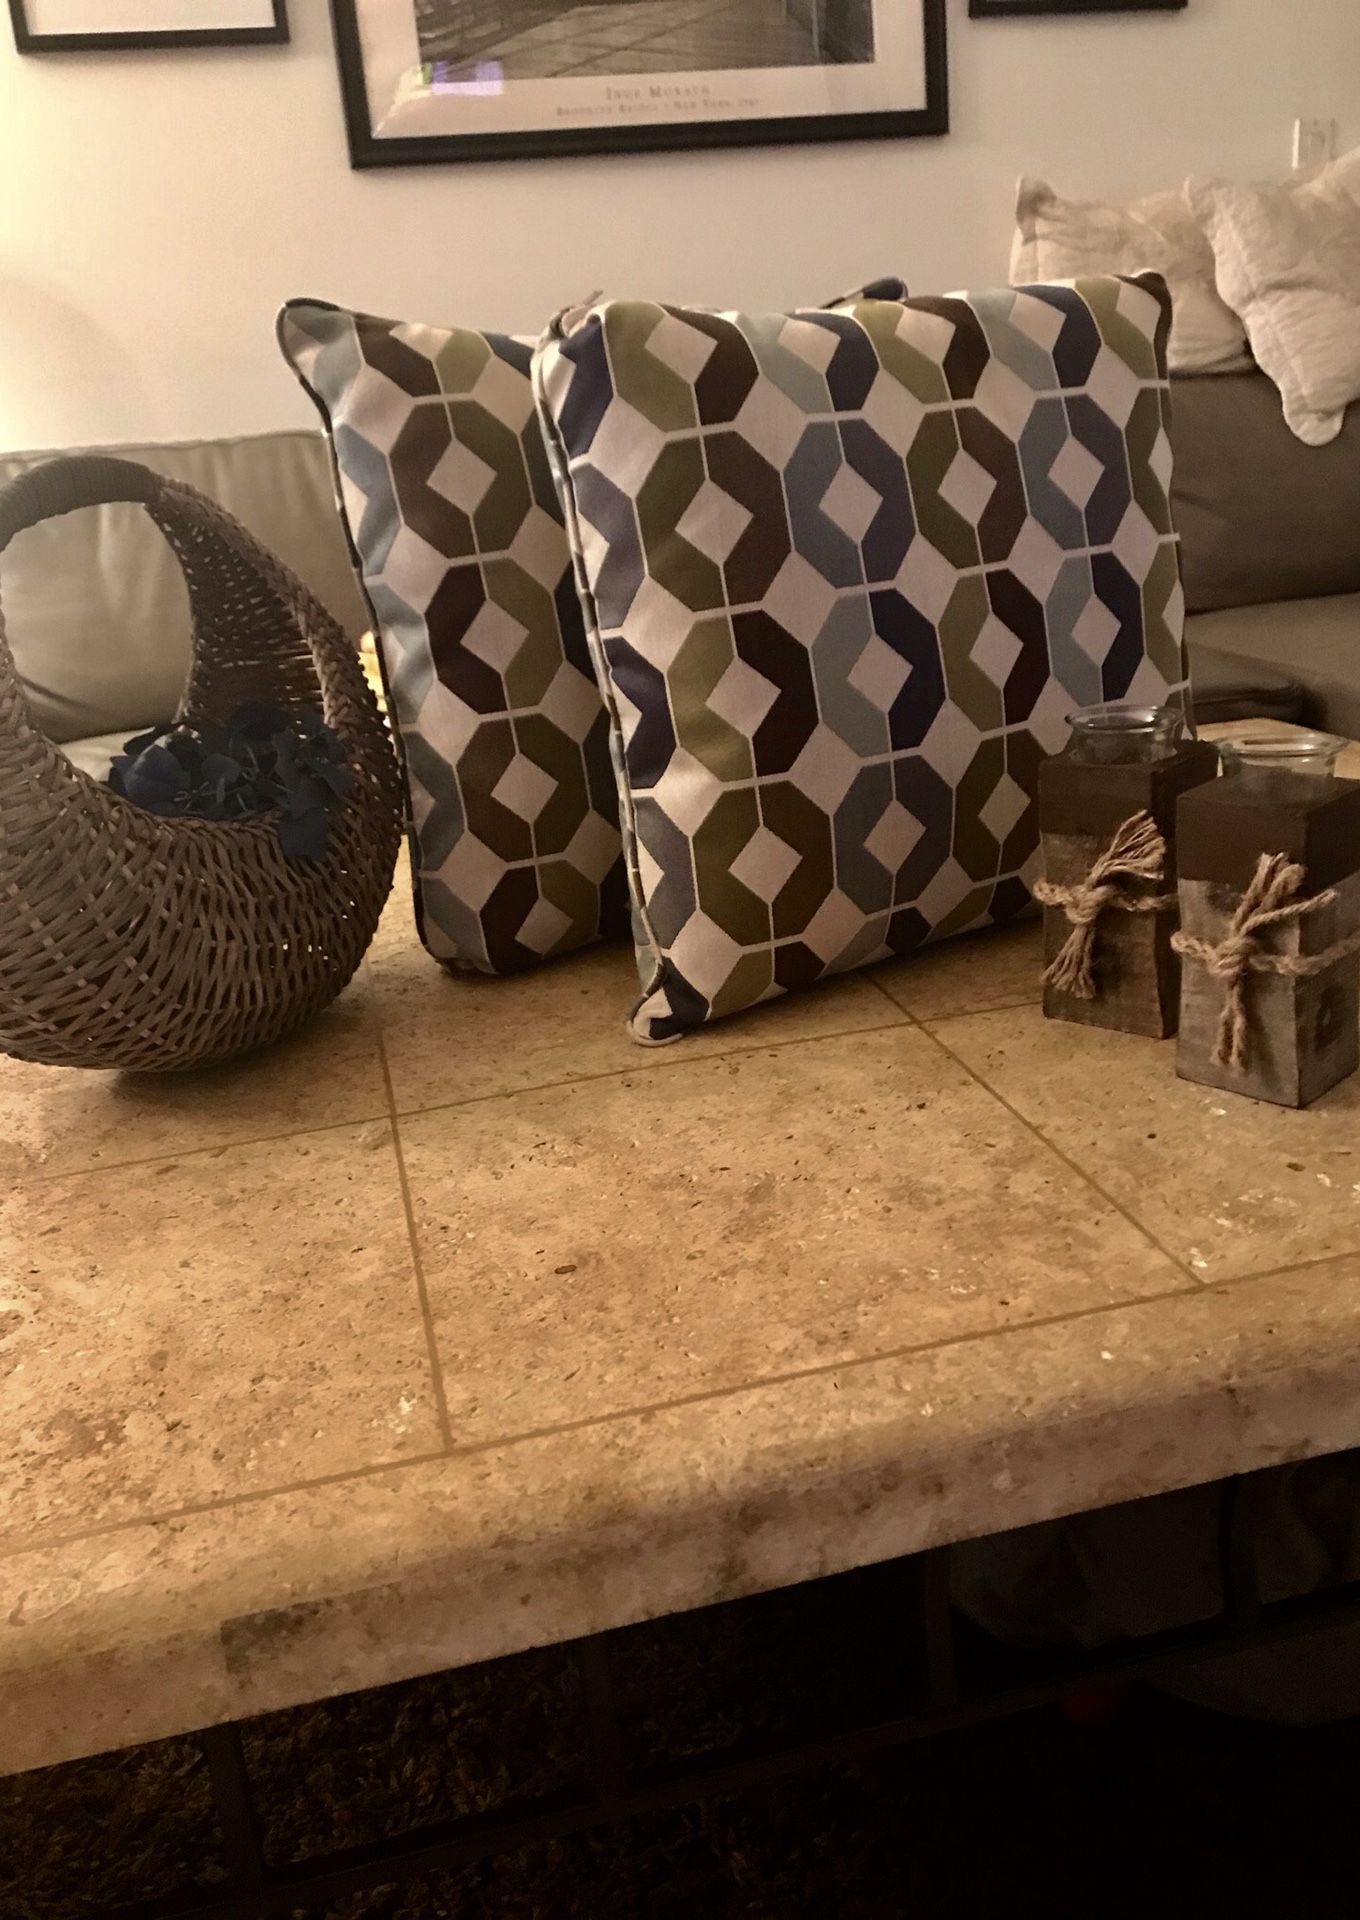 Home decor everything for $40